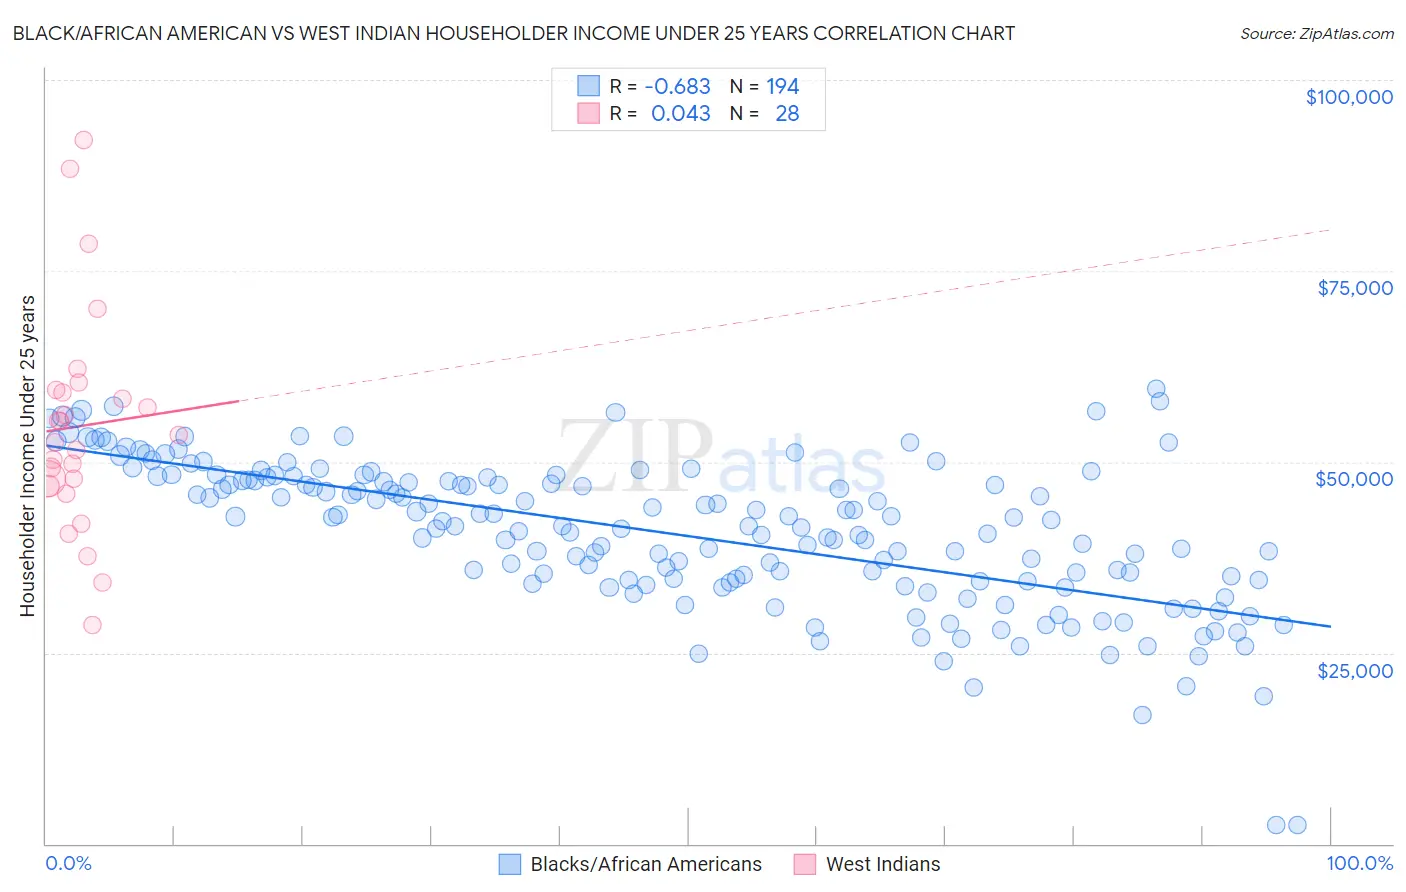 Black/African American vs West Indian Householder Income Under 25 years